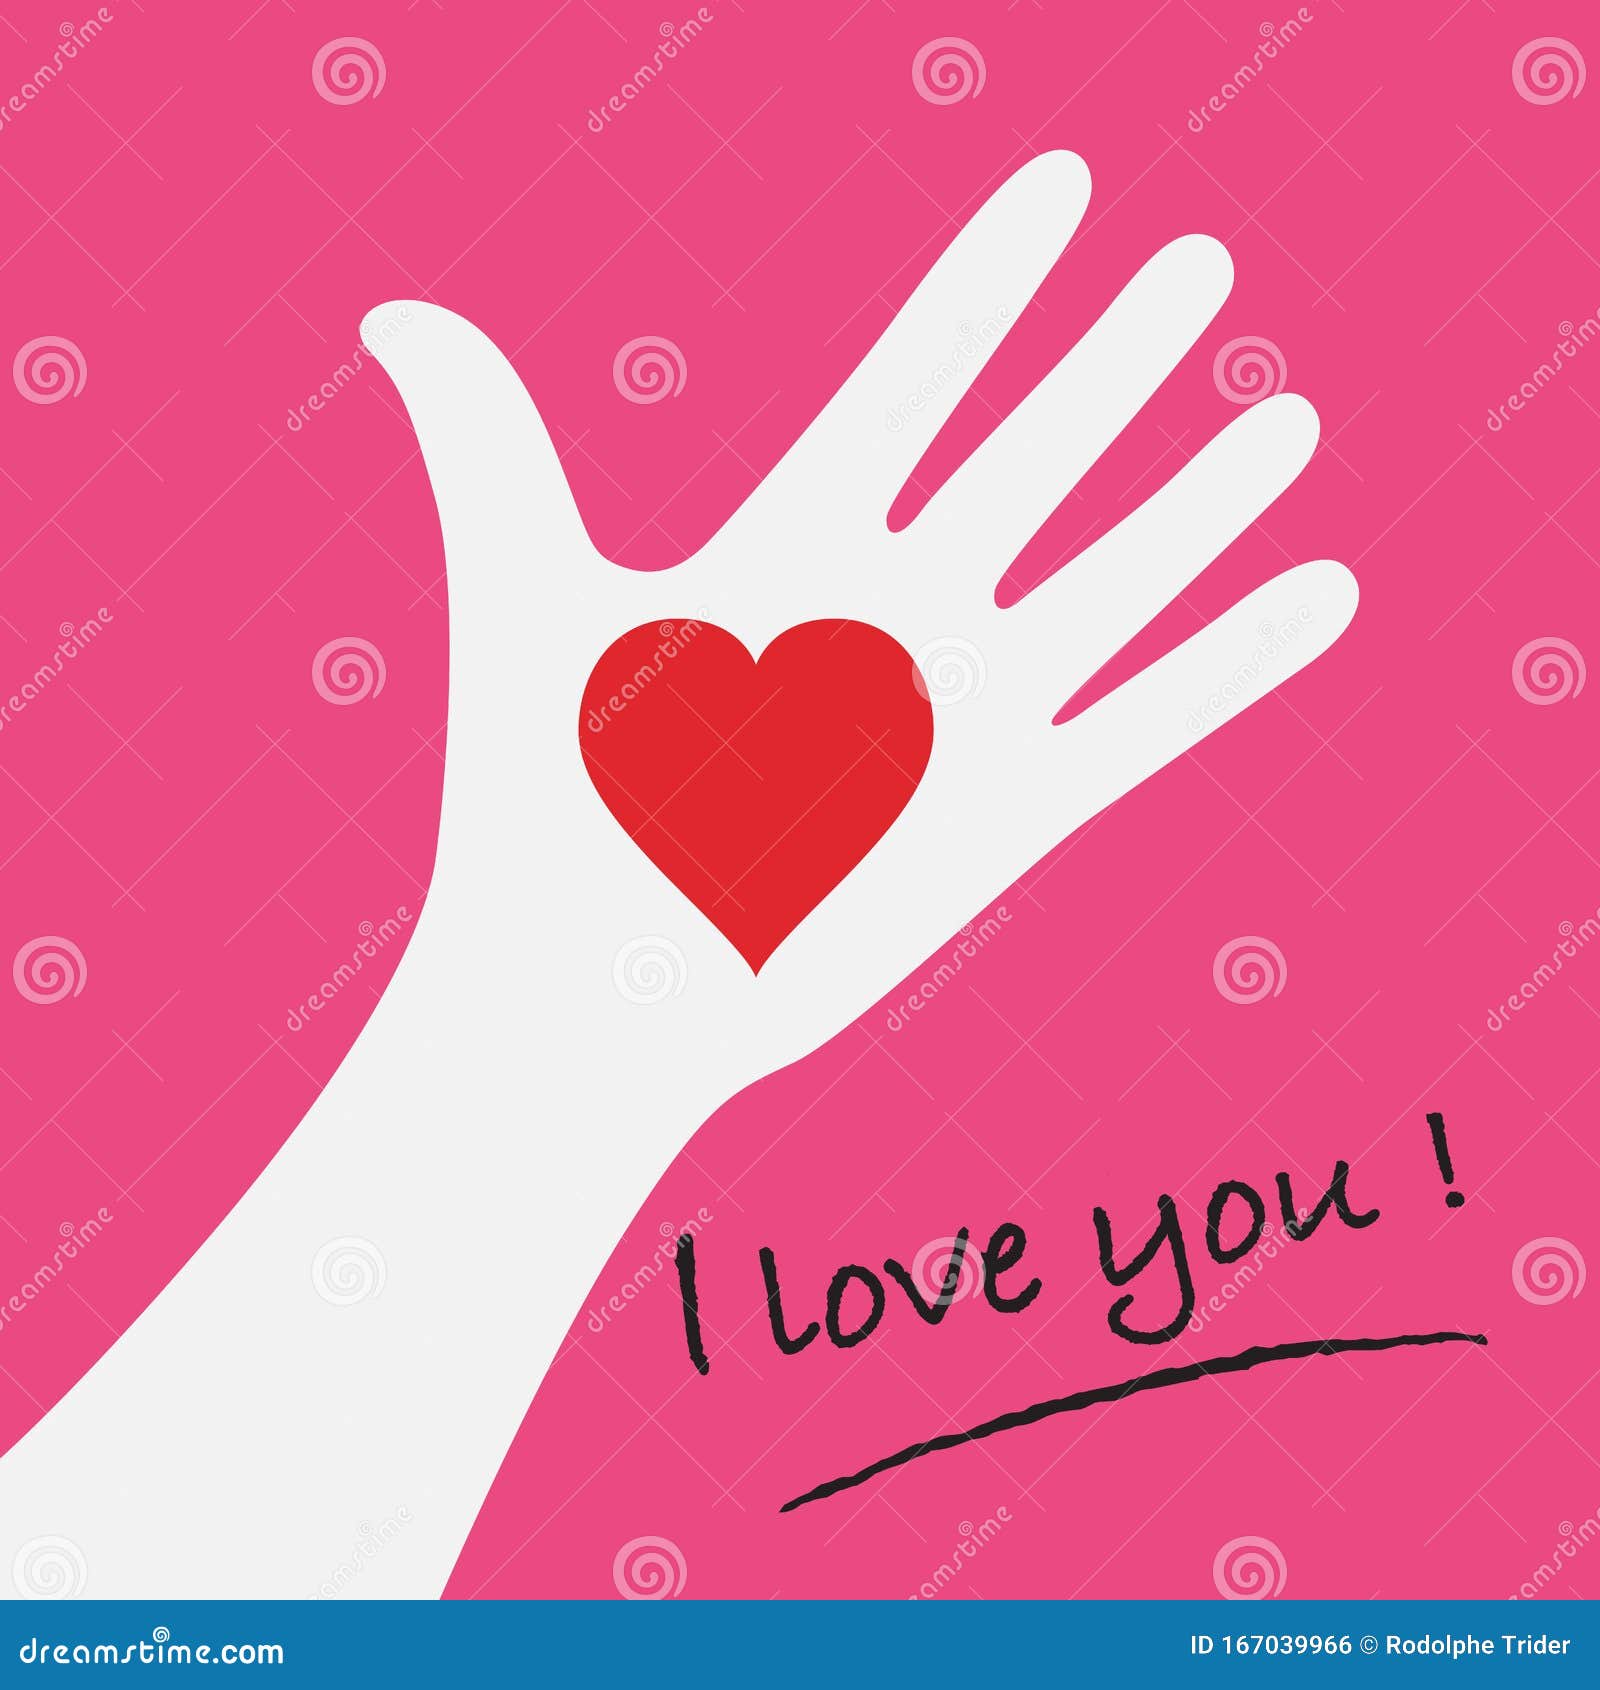 https://thumbs.dreamstime.com/z/declaration-love-heart-drawn-one-hand-accompanied-message-i-love-you-concept-love-first-sight-167039966.jpg